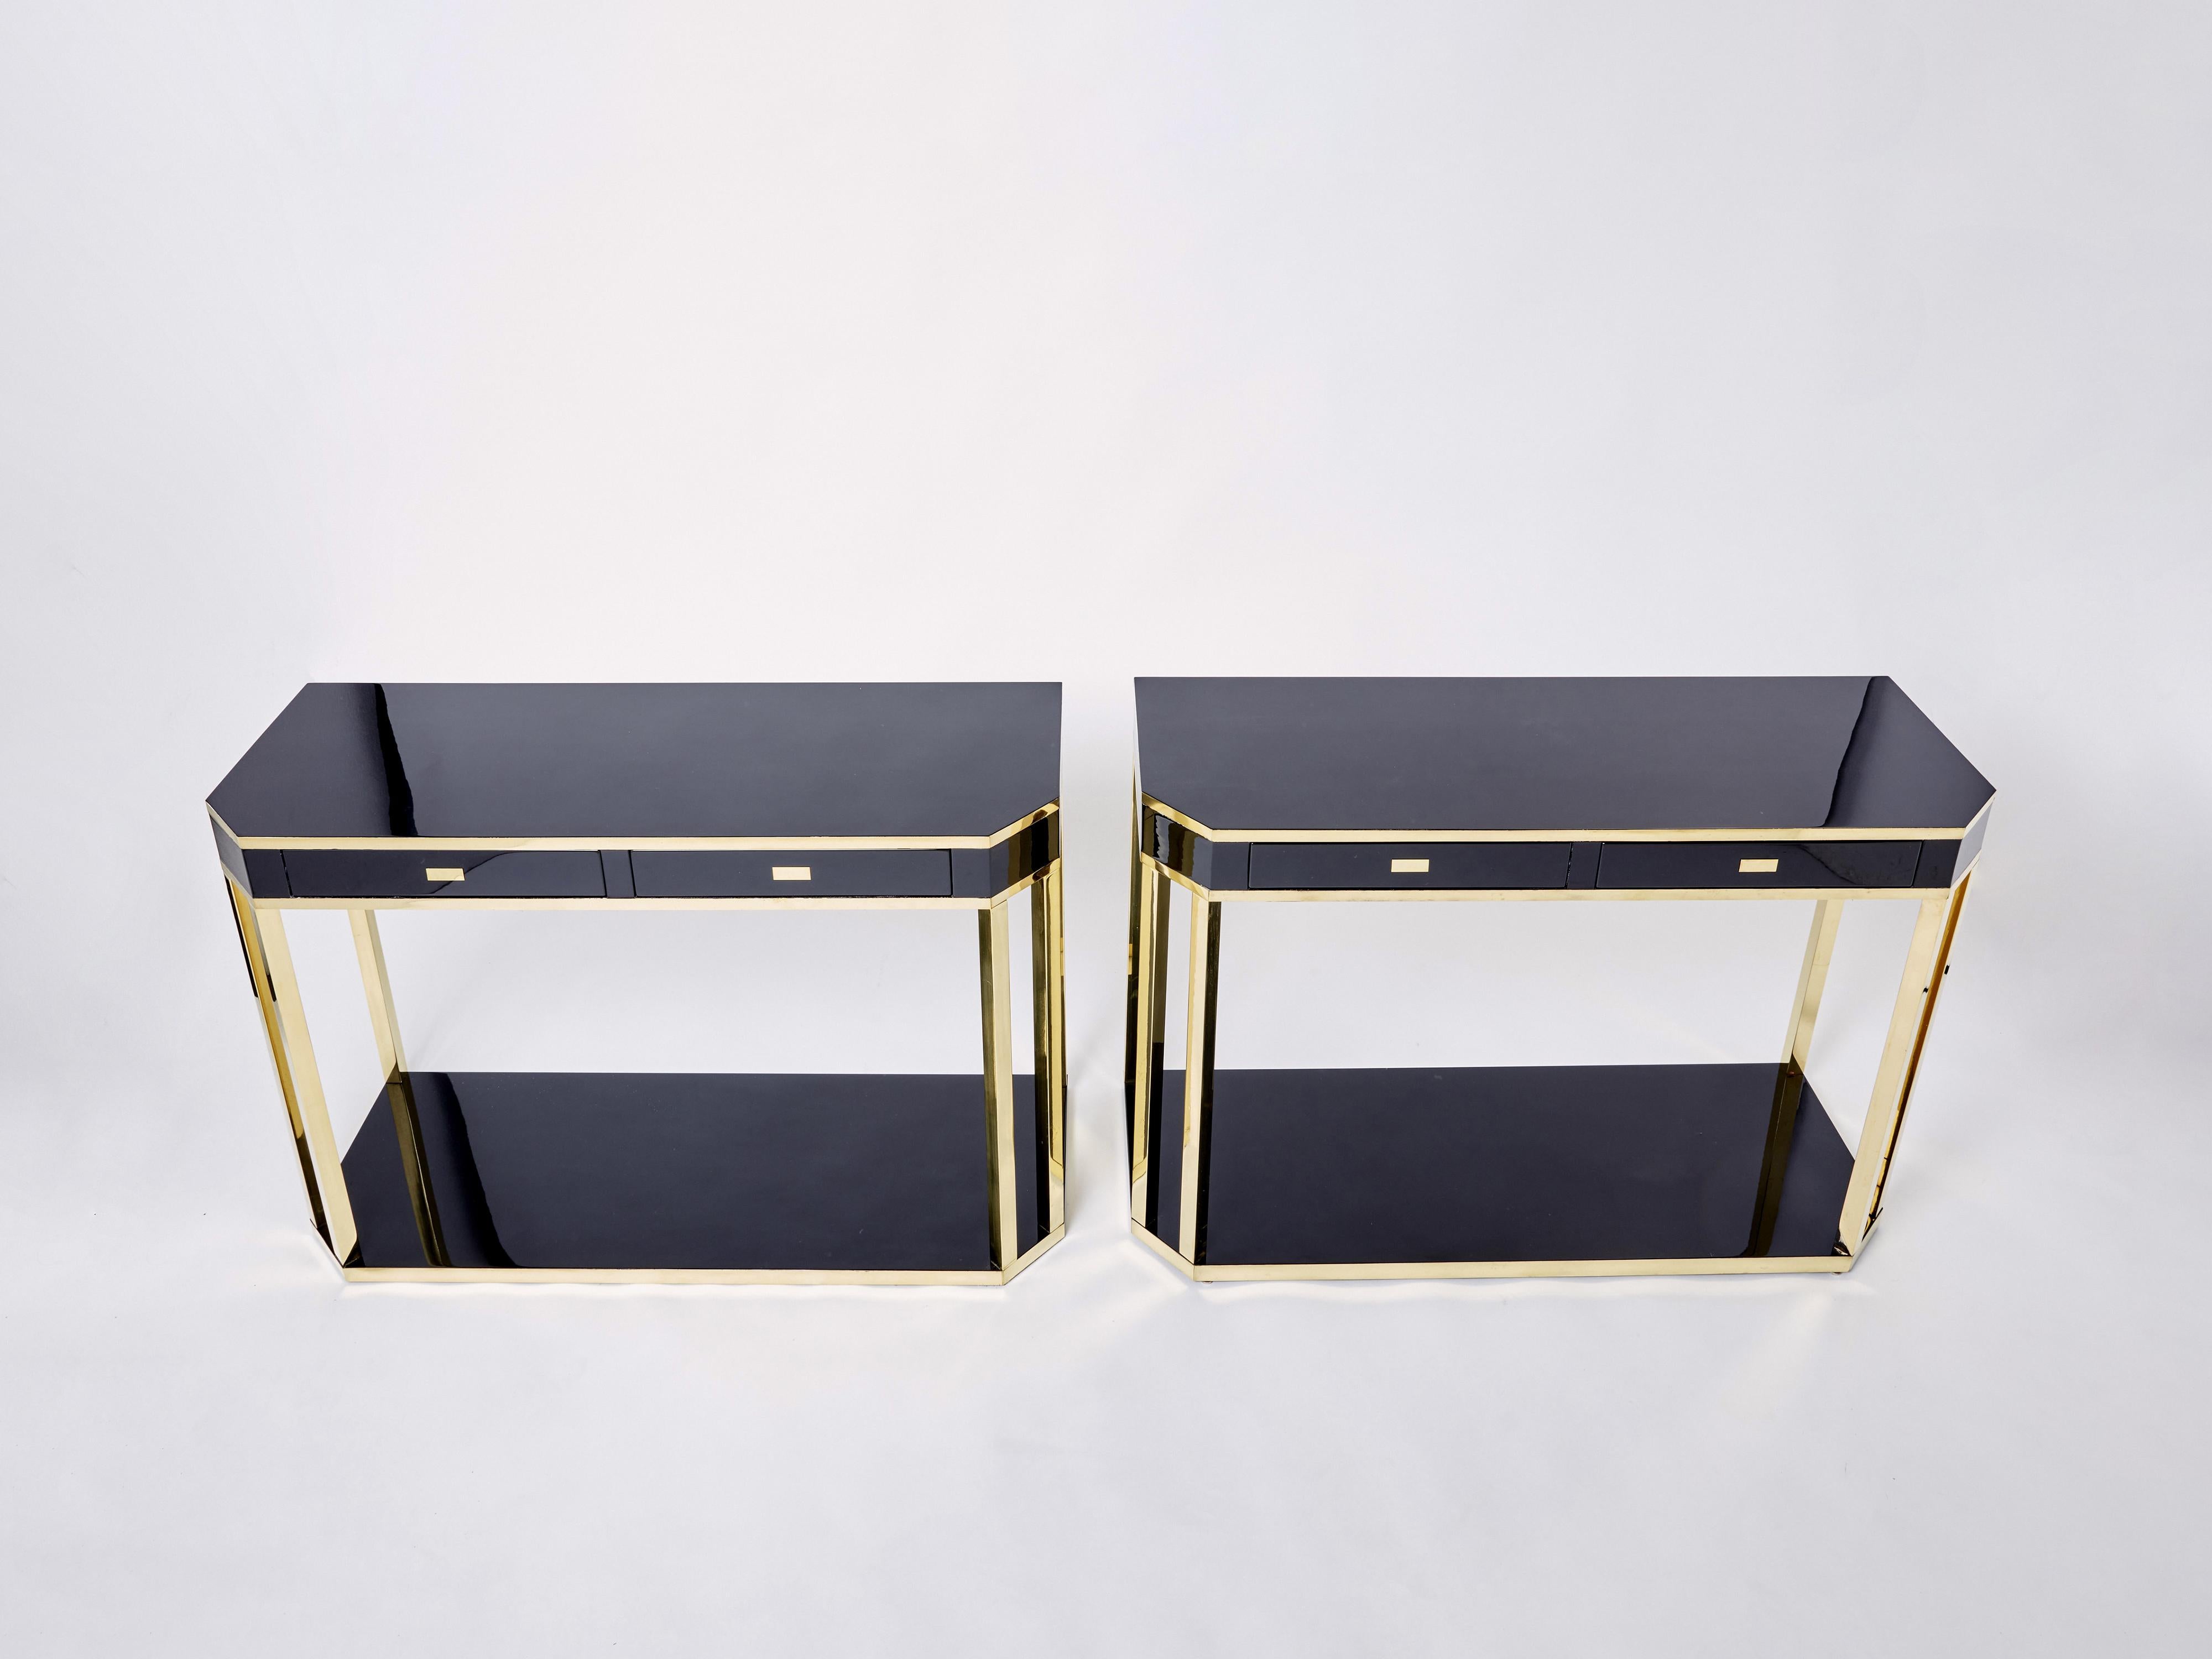 With a shining black lacquered top, and sharply geometric brass legs and details, this beautiful pair of console tables carries a stellar French mid-century aesthetic into the contemporary home. Its boxy yet sophisticated style is typical of both